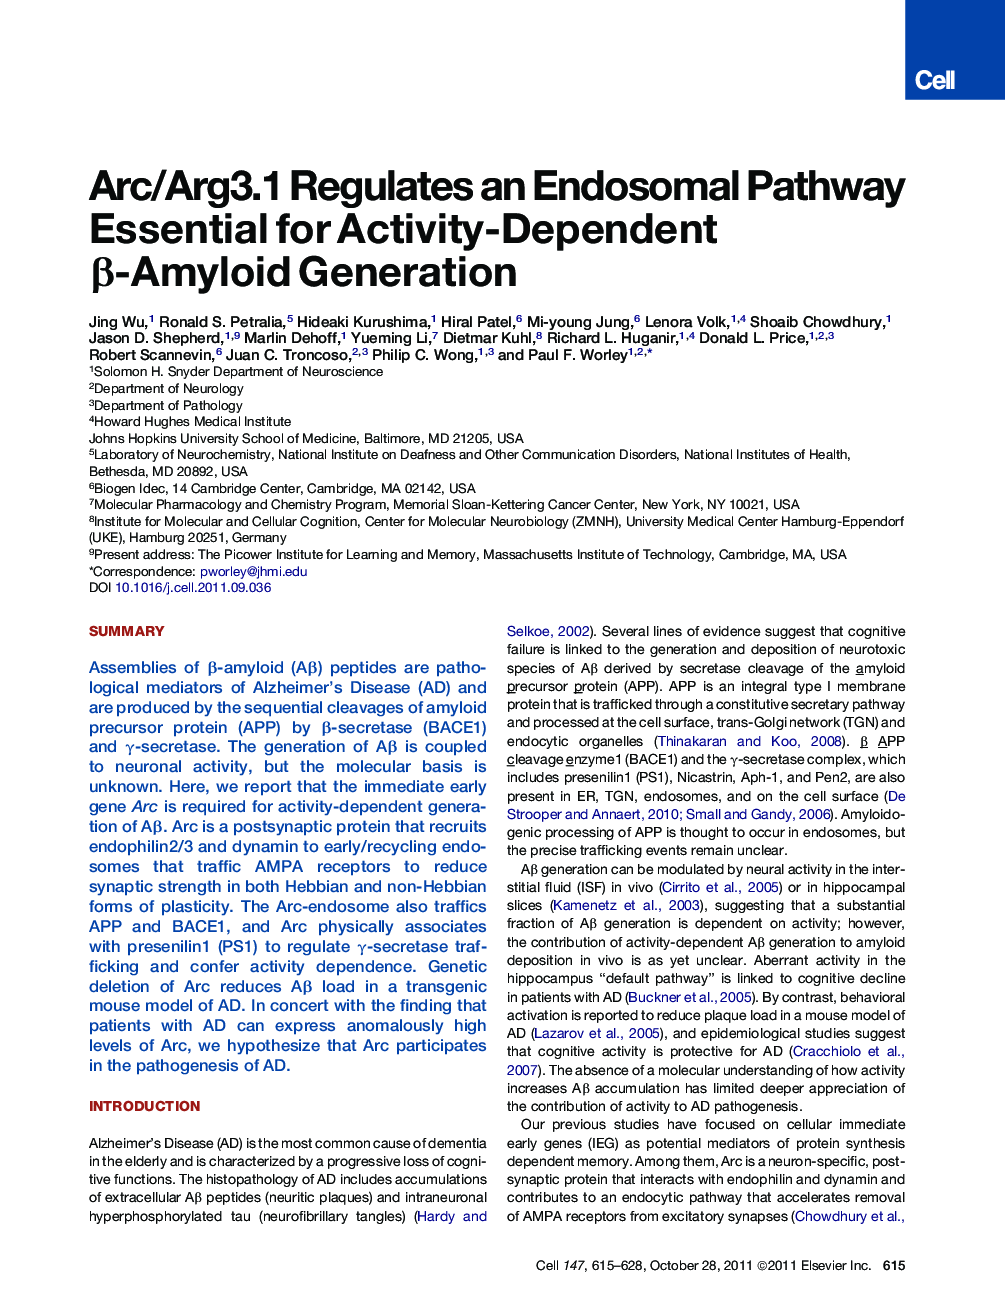 Arc/Arg3.1 Regulates an Endosomal Pathway Essential for Activity-Dependent β-Amyloid Generation